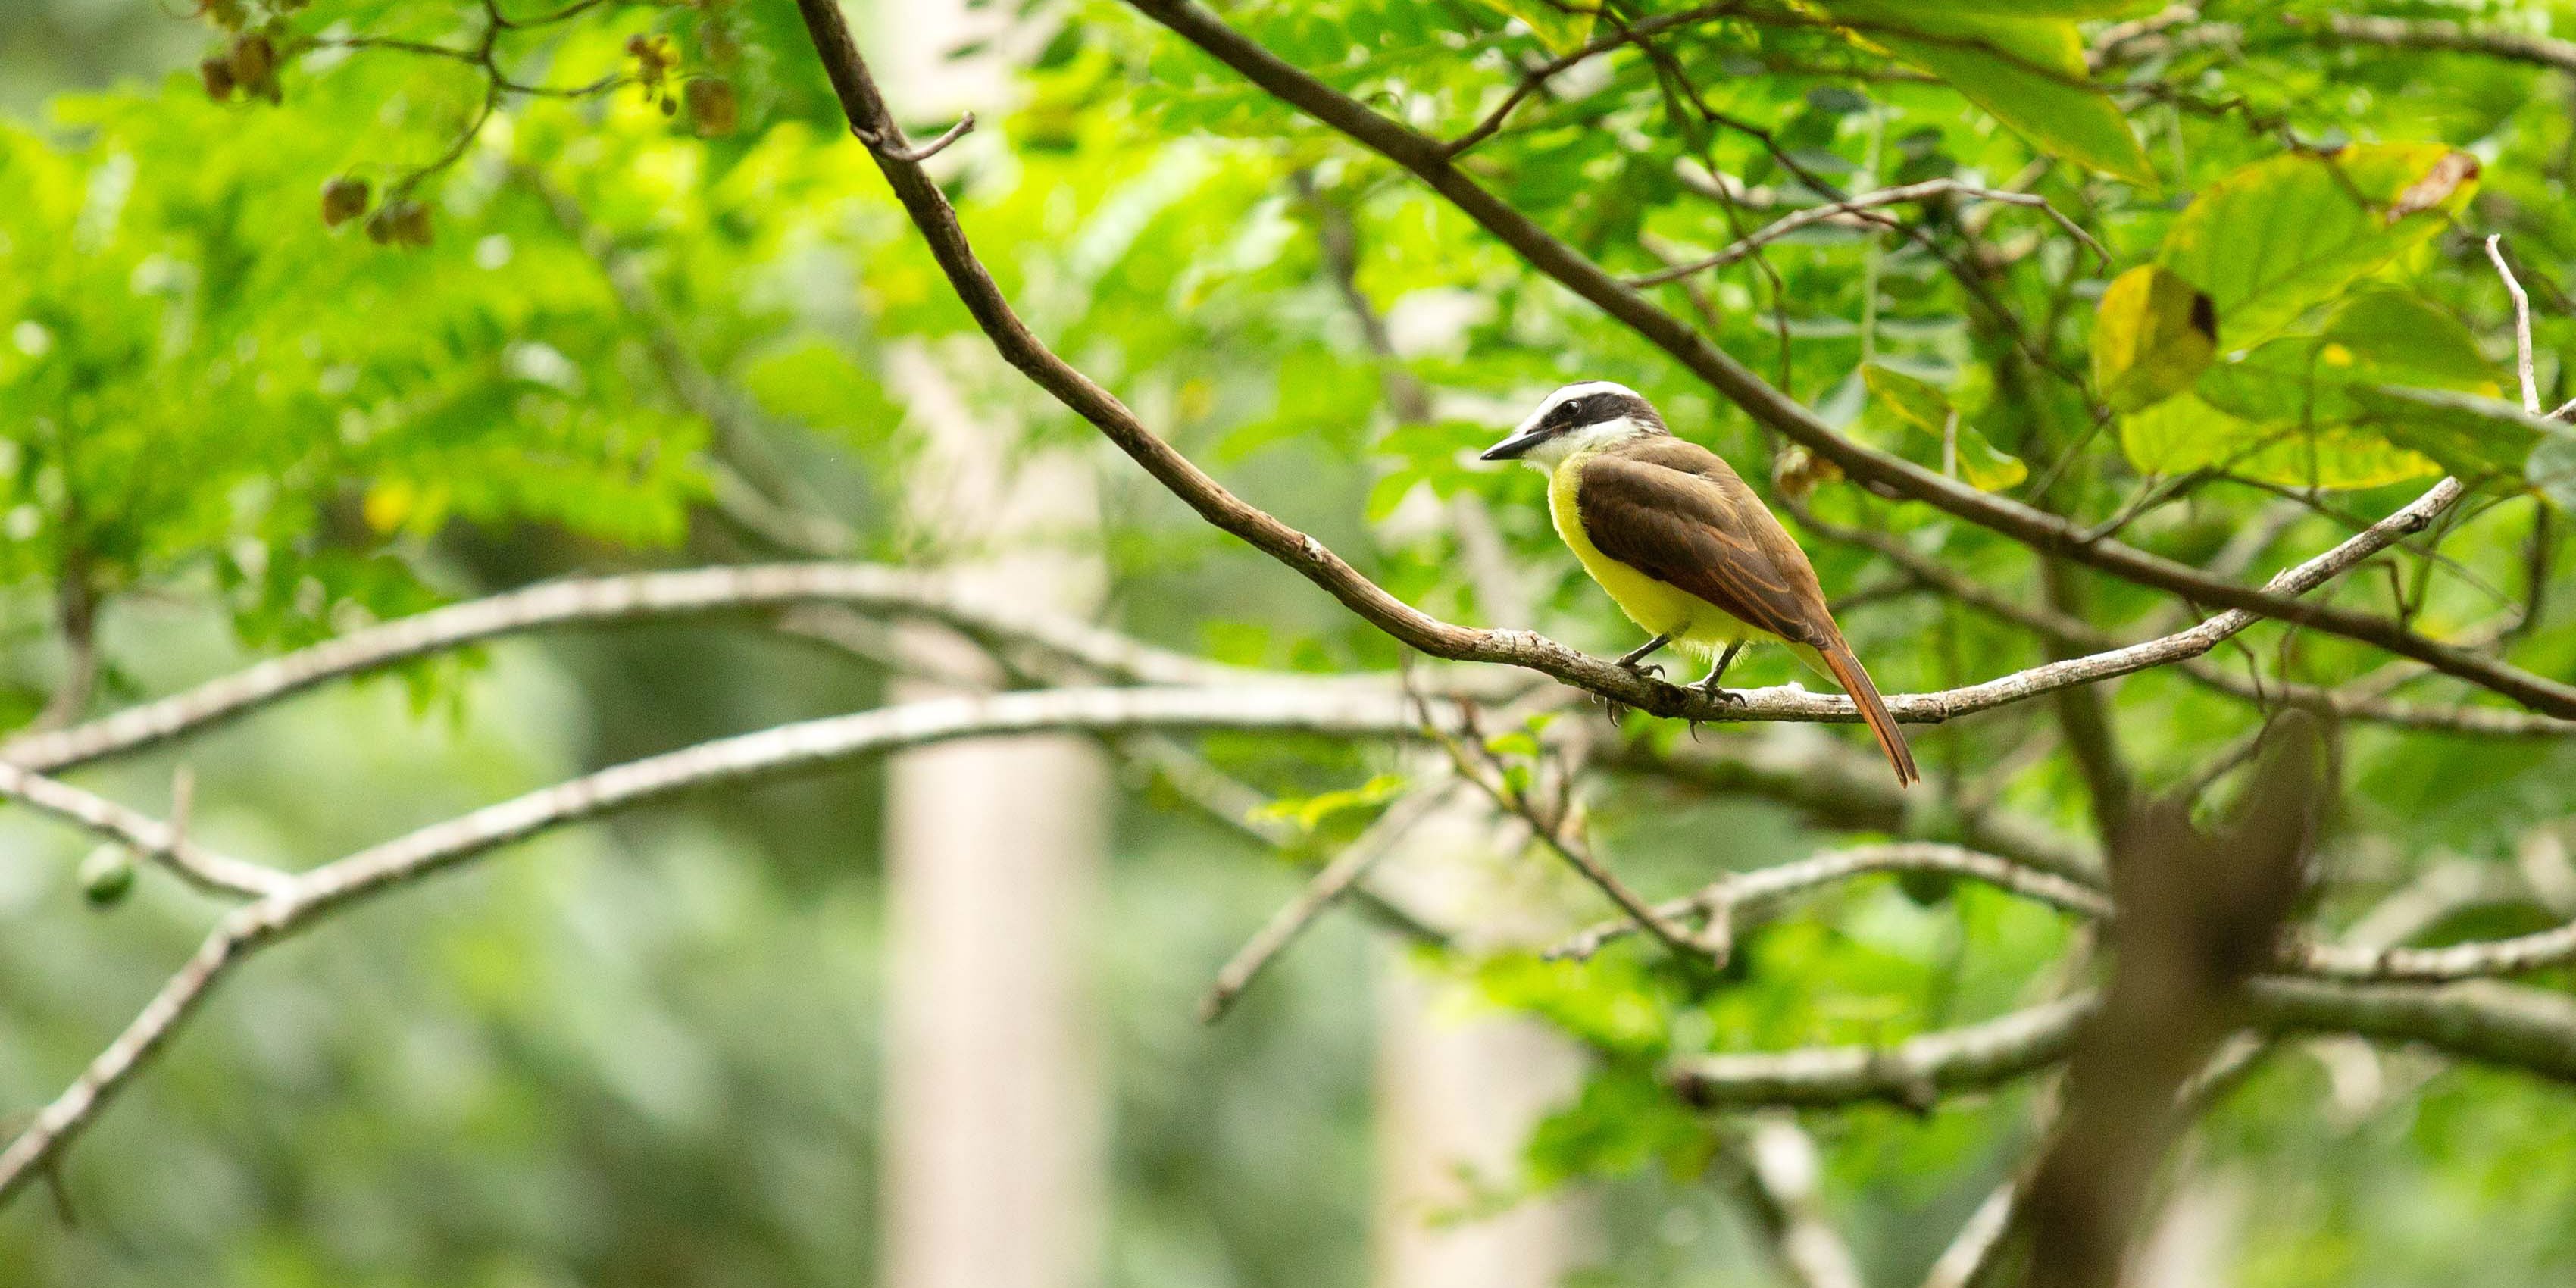 A bird perches on a branch in Costa Rica. While volunteering in Jalova, GVI participants might help to record data on the biodiversity in the area.